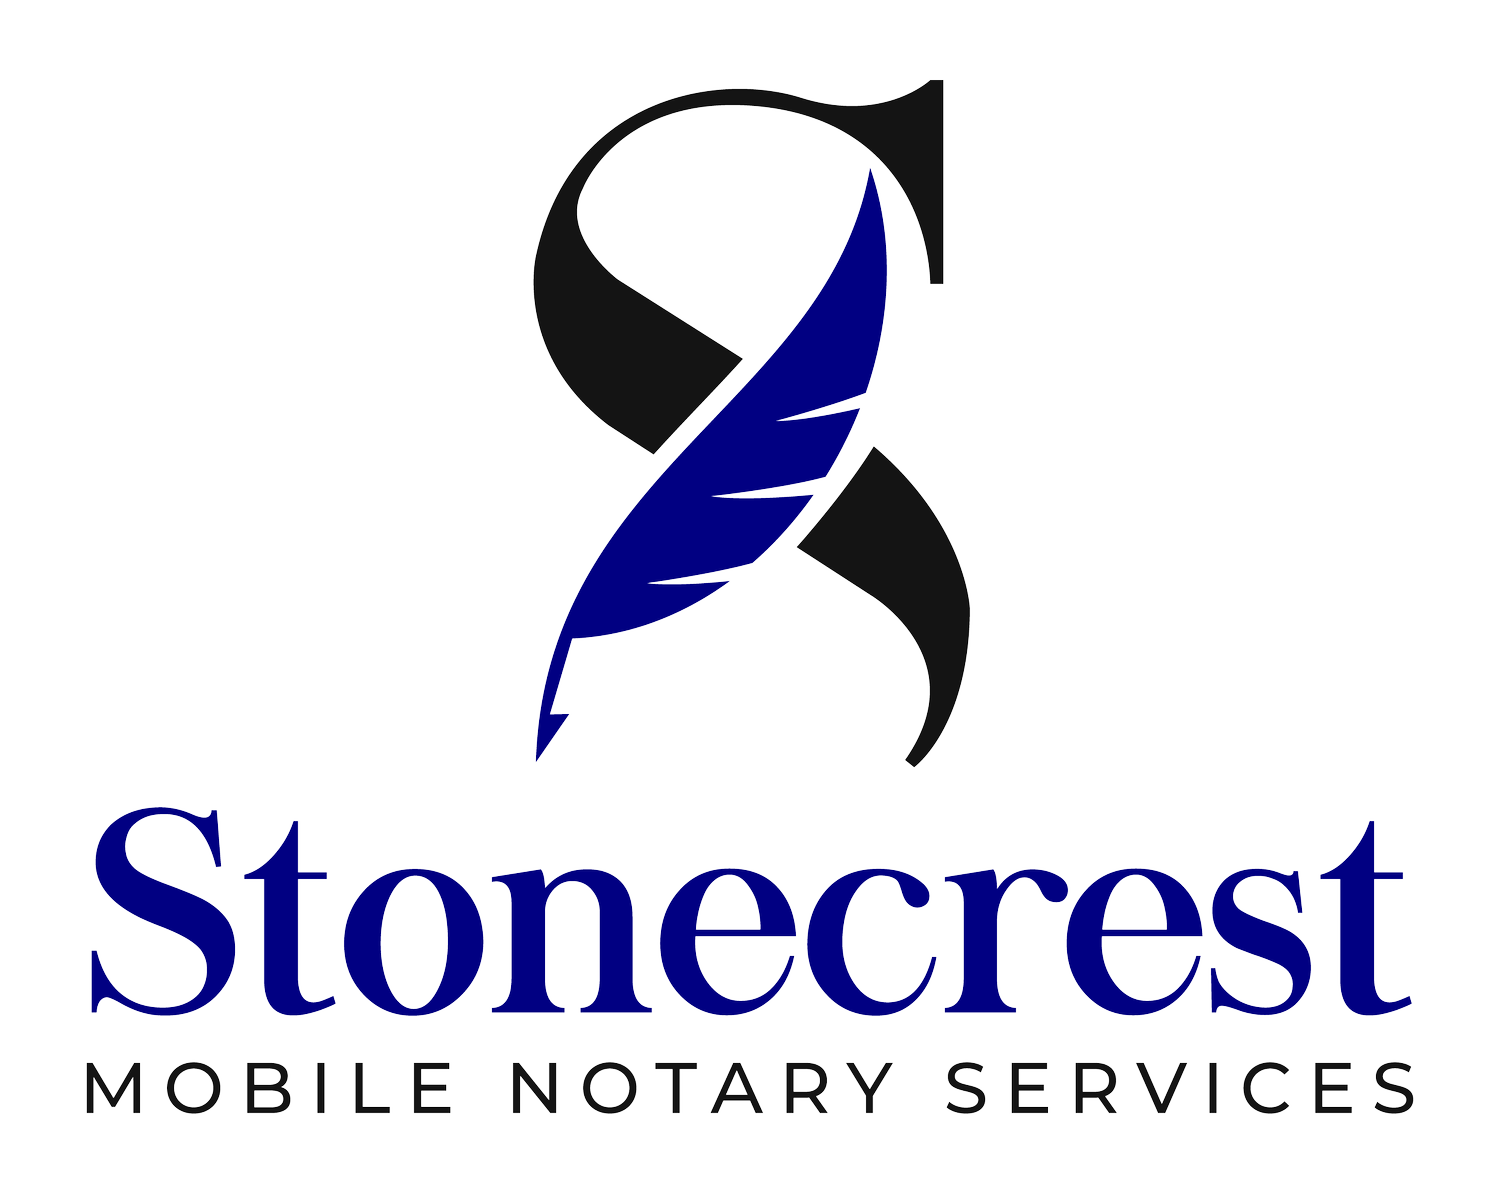 Stonecrest Mobile Notary Services